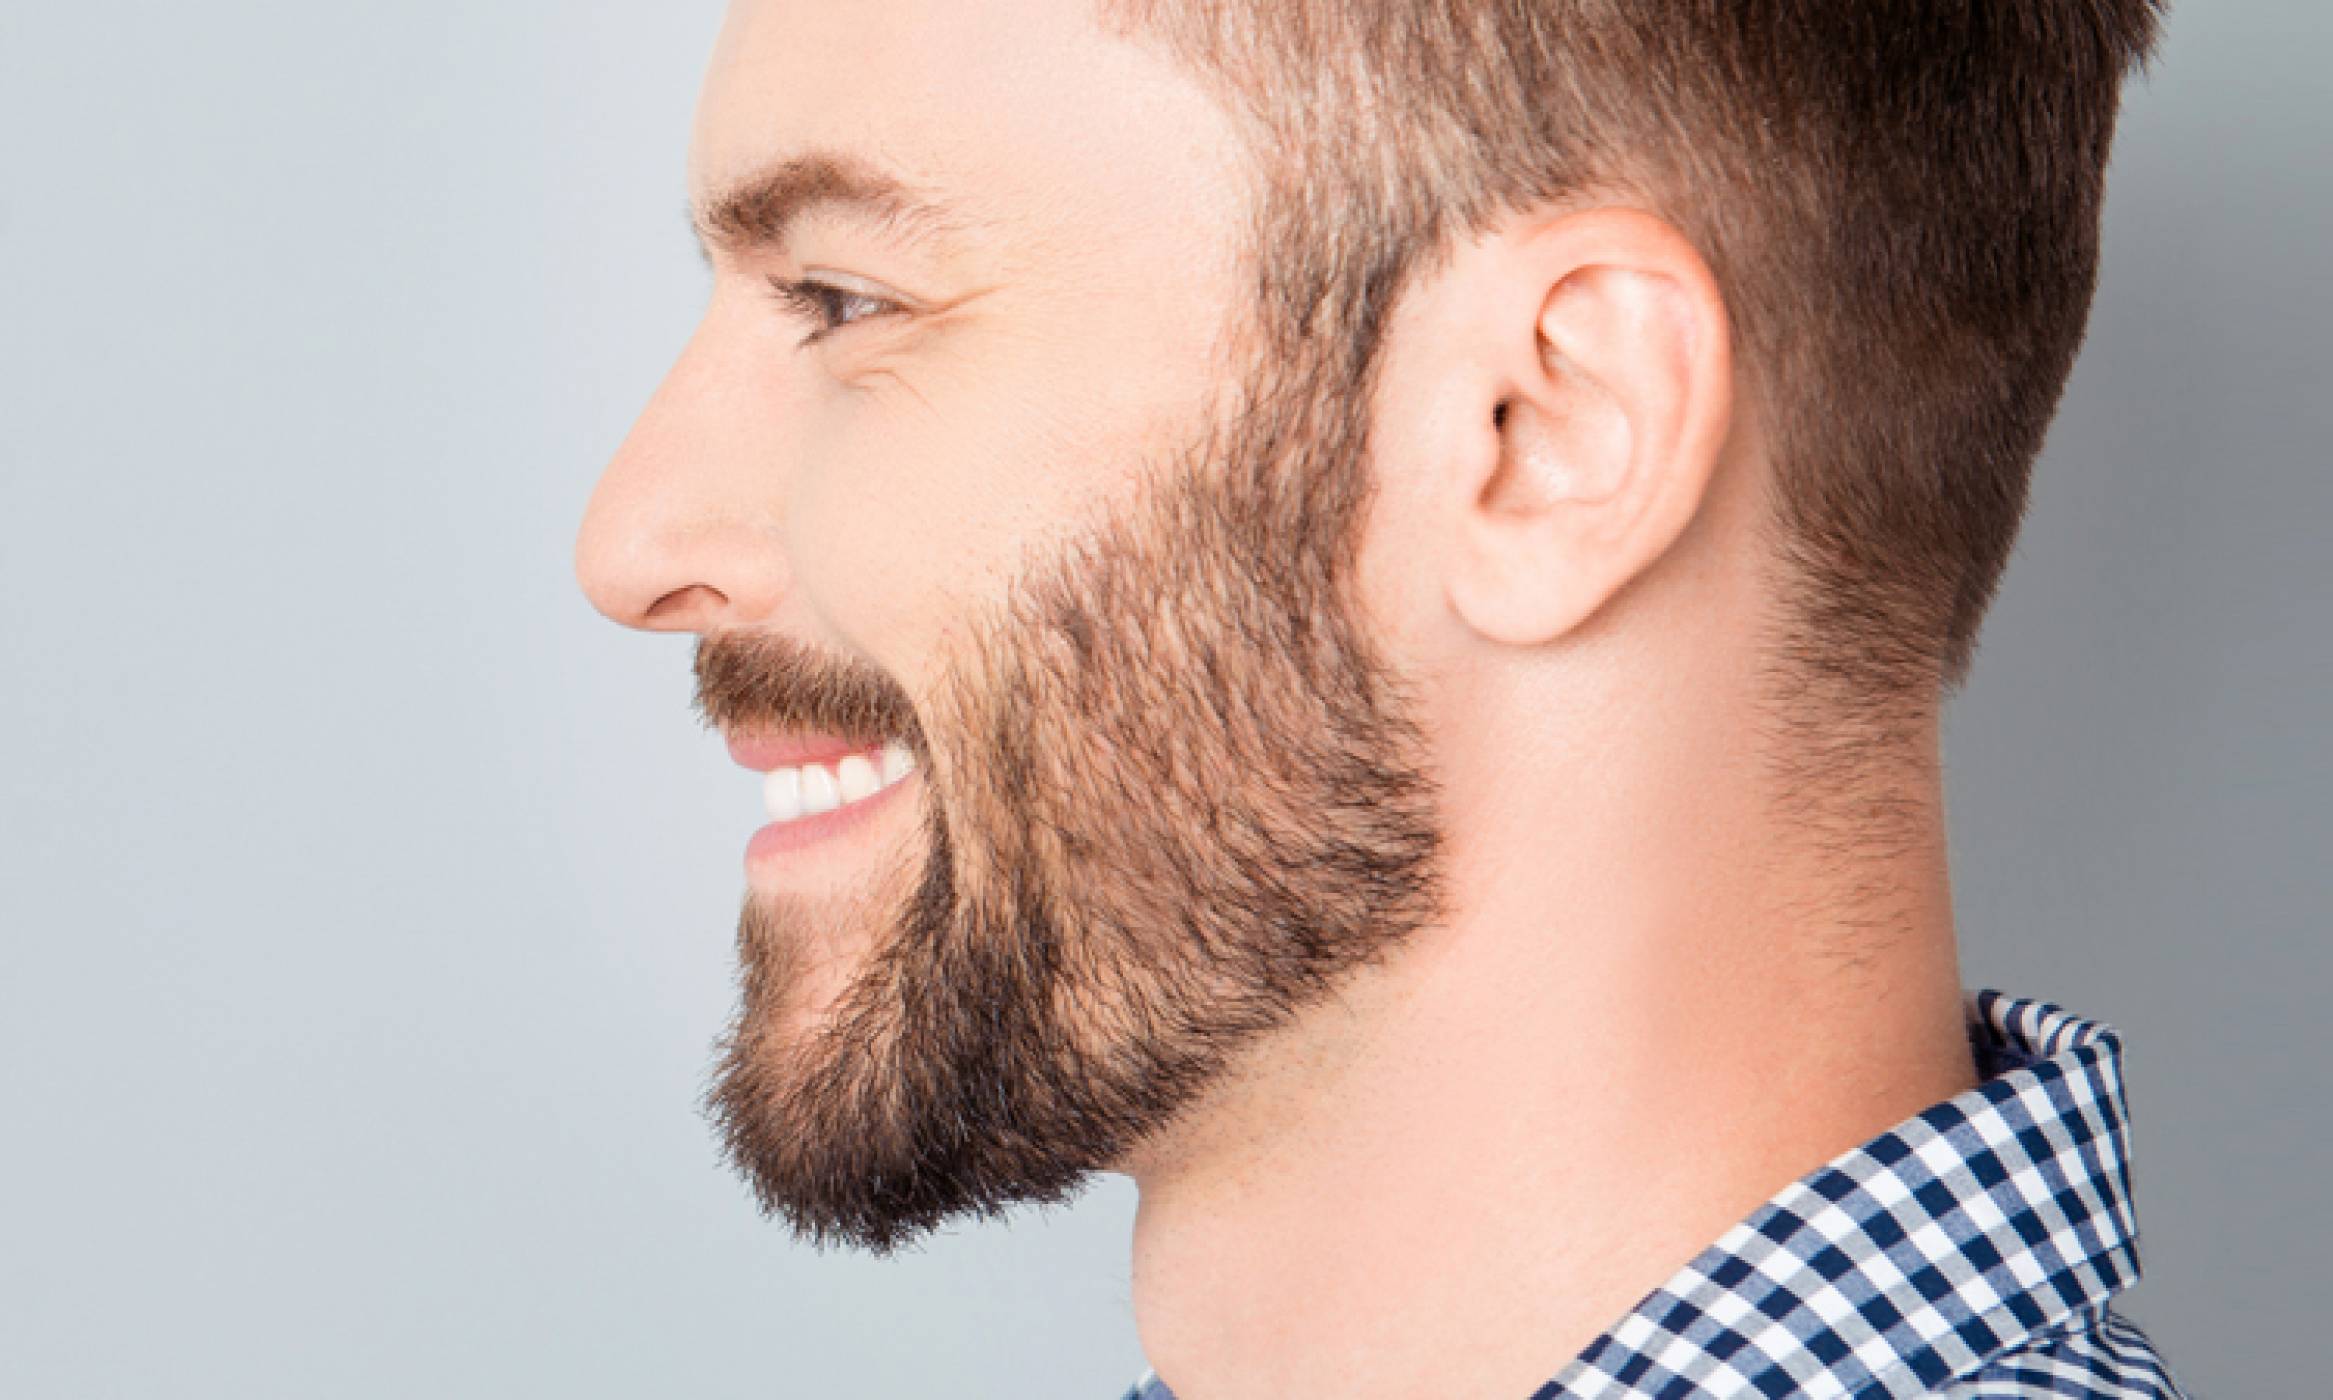 A man with a full beard, thick lashes, & natural-looking brows, showcasing the results of a successful hair transplant